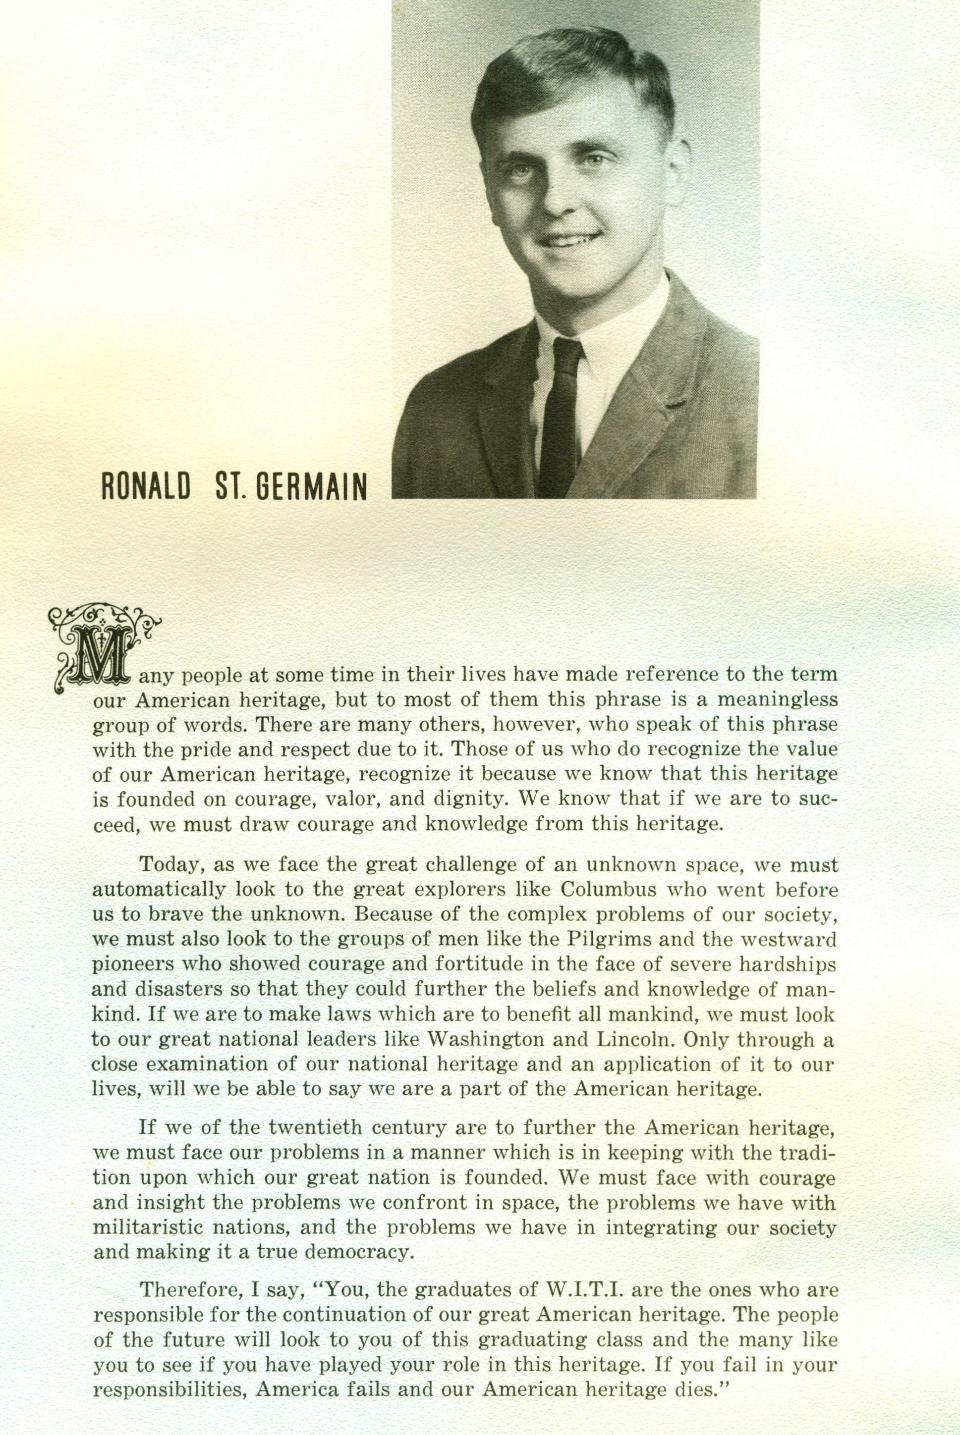 Worcester Industrial Technical Institute Class of 1967 Yearbook Class President Message Ronald St. Germain